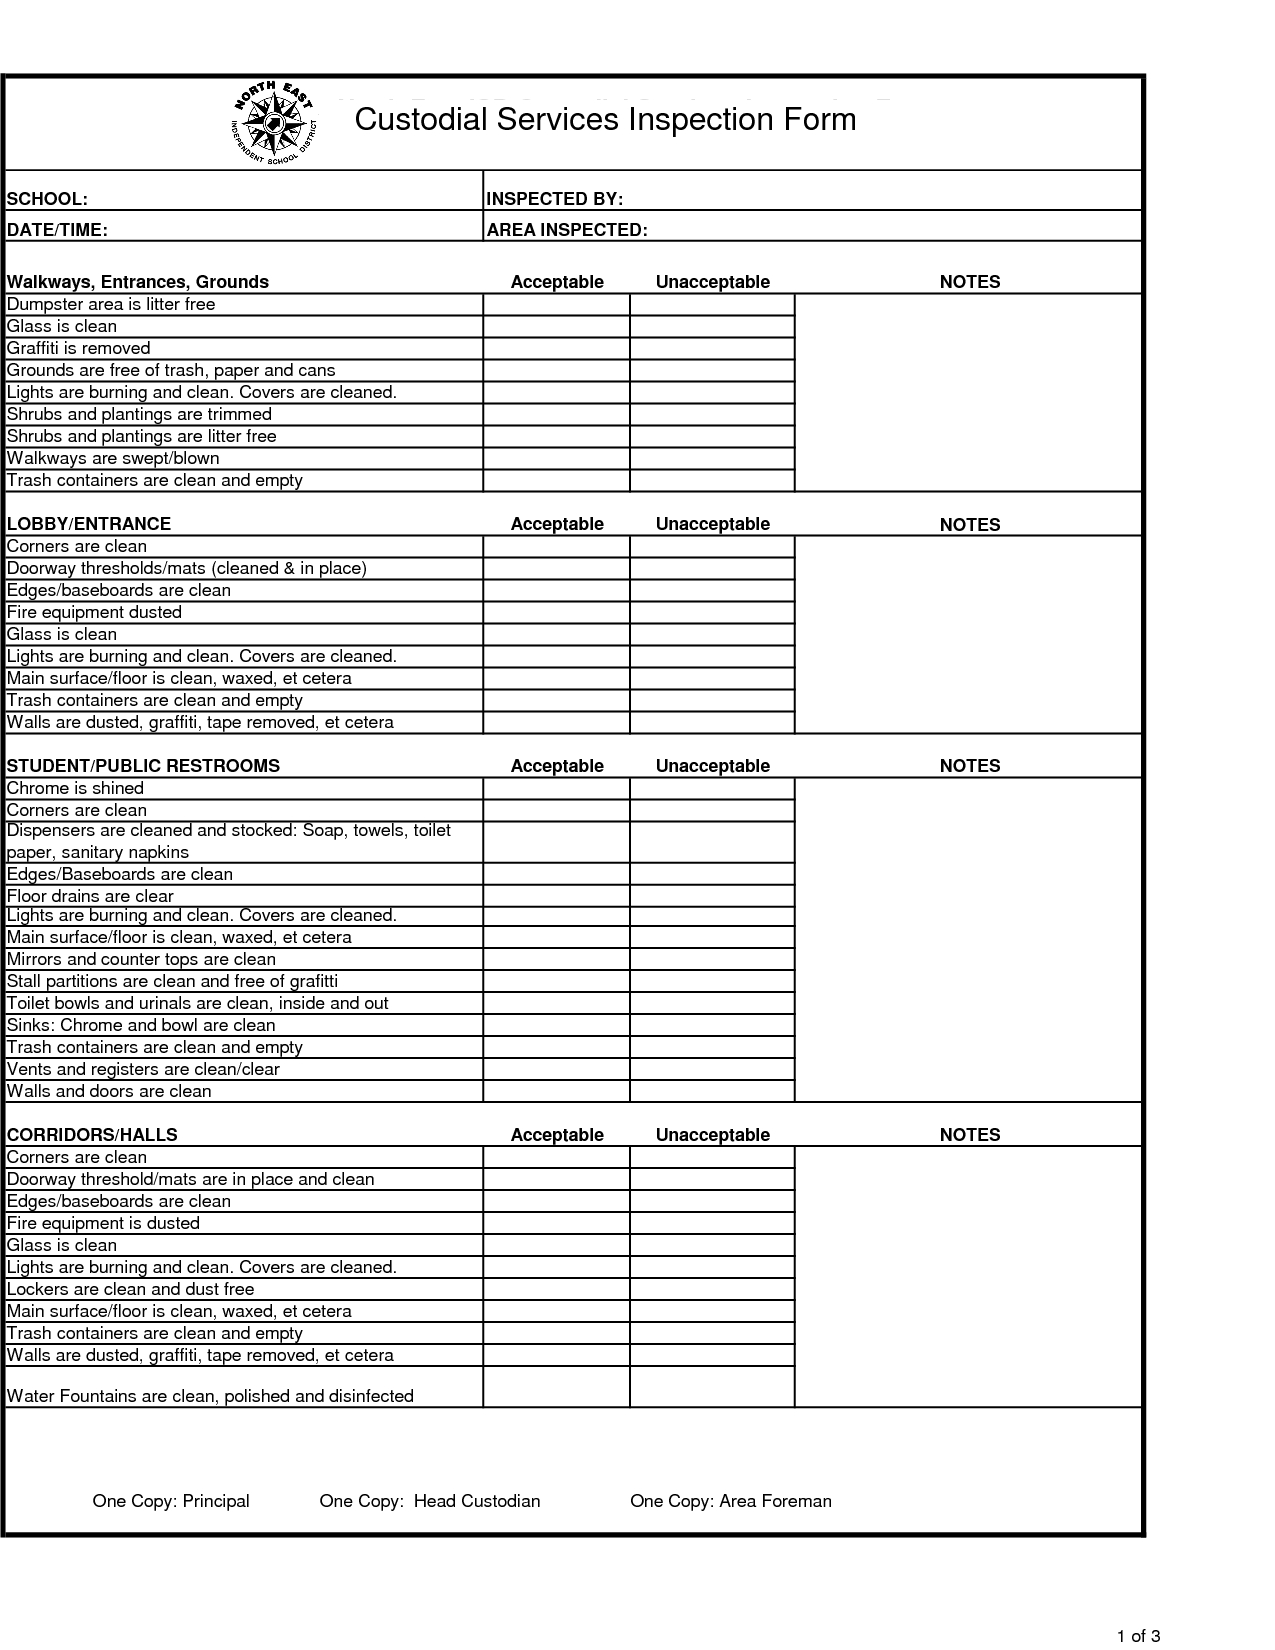 Inspection Spreadsheet Template Best Photos Of Free With Vehicle Inspection Report Template